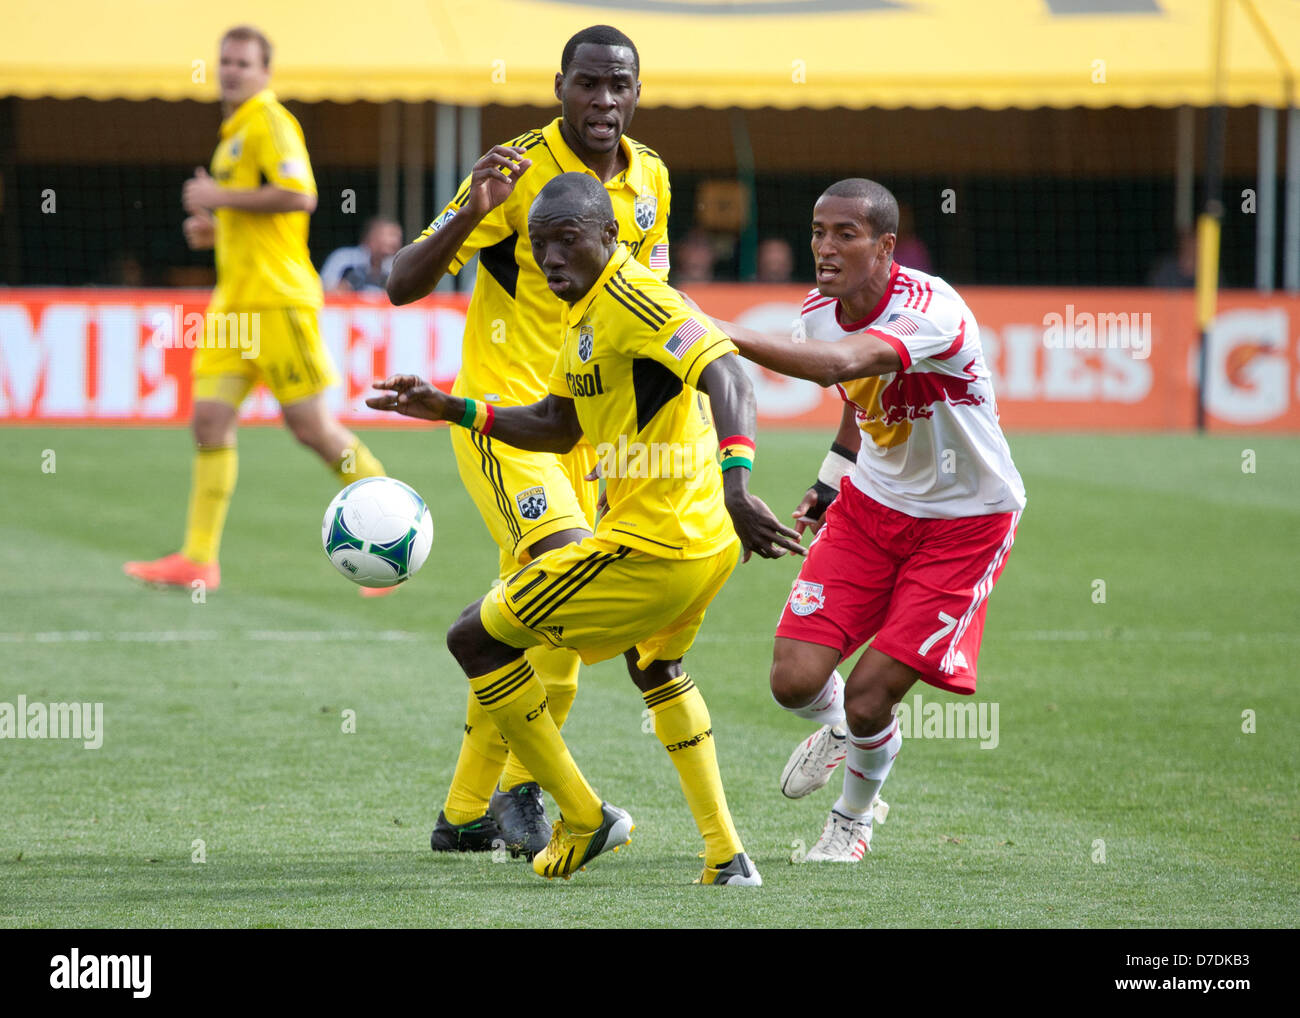 Columbus, UH, USA. 4th May, 2013. Columbus Crew Dominic Oduro (11) and New York Red Bulls Roy Miller (7) chase after a loose ball during the Major League Soccer match between the New York Red Bulls and the Columbus Crew at Columbus Crew Stadium in Columbus, OH Stock Photo